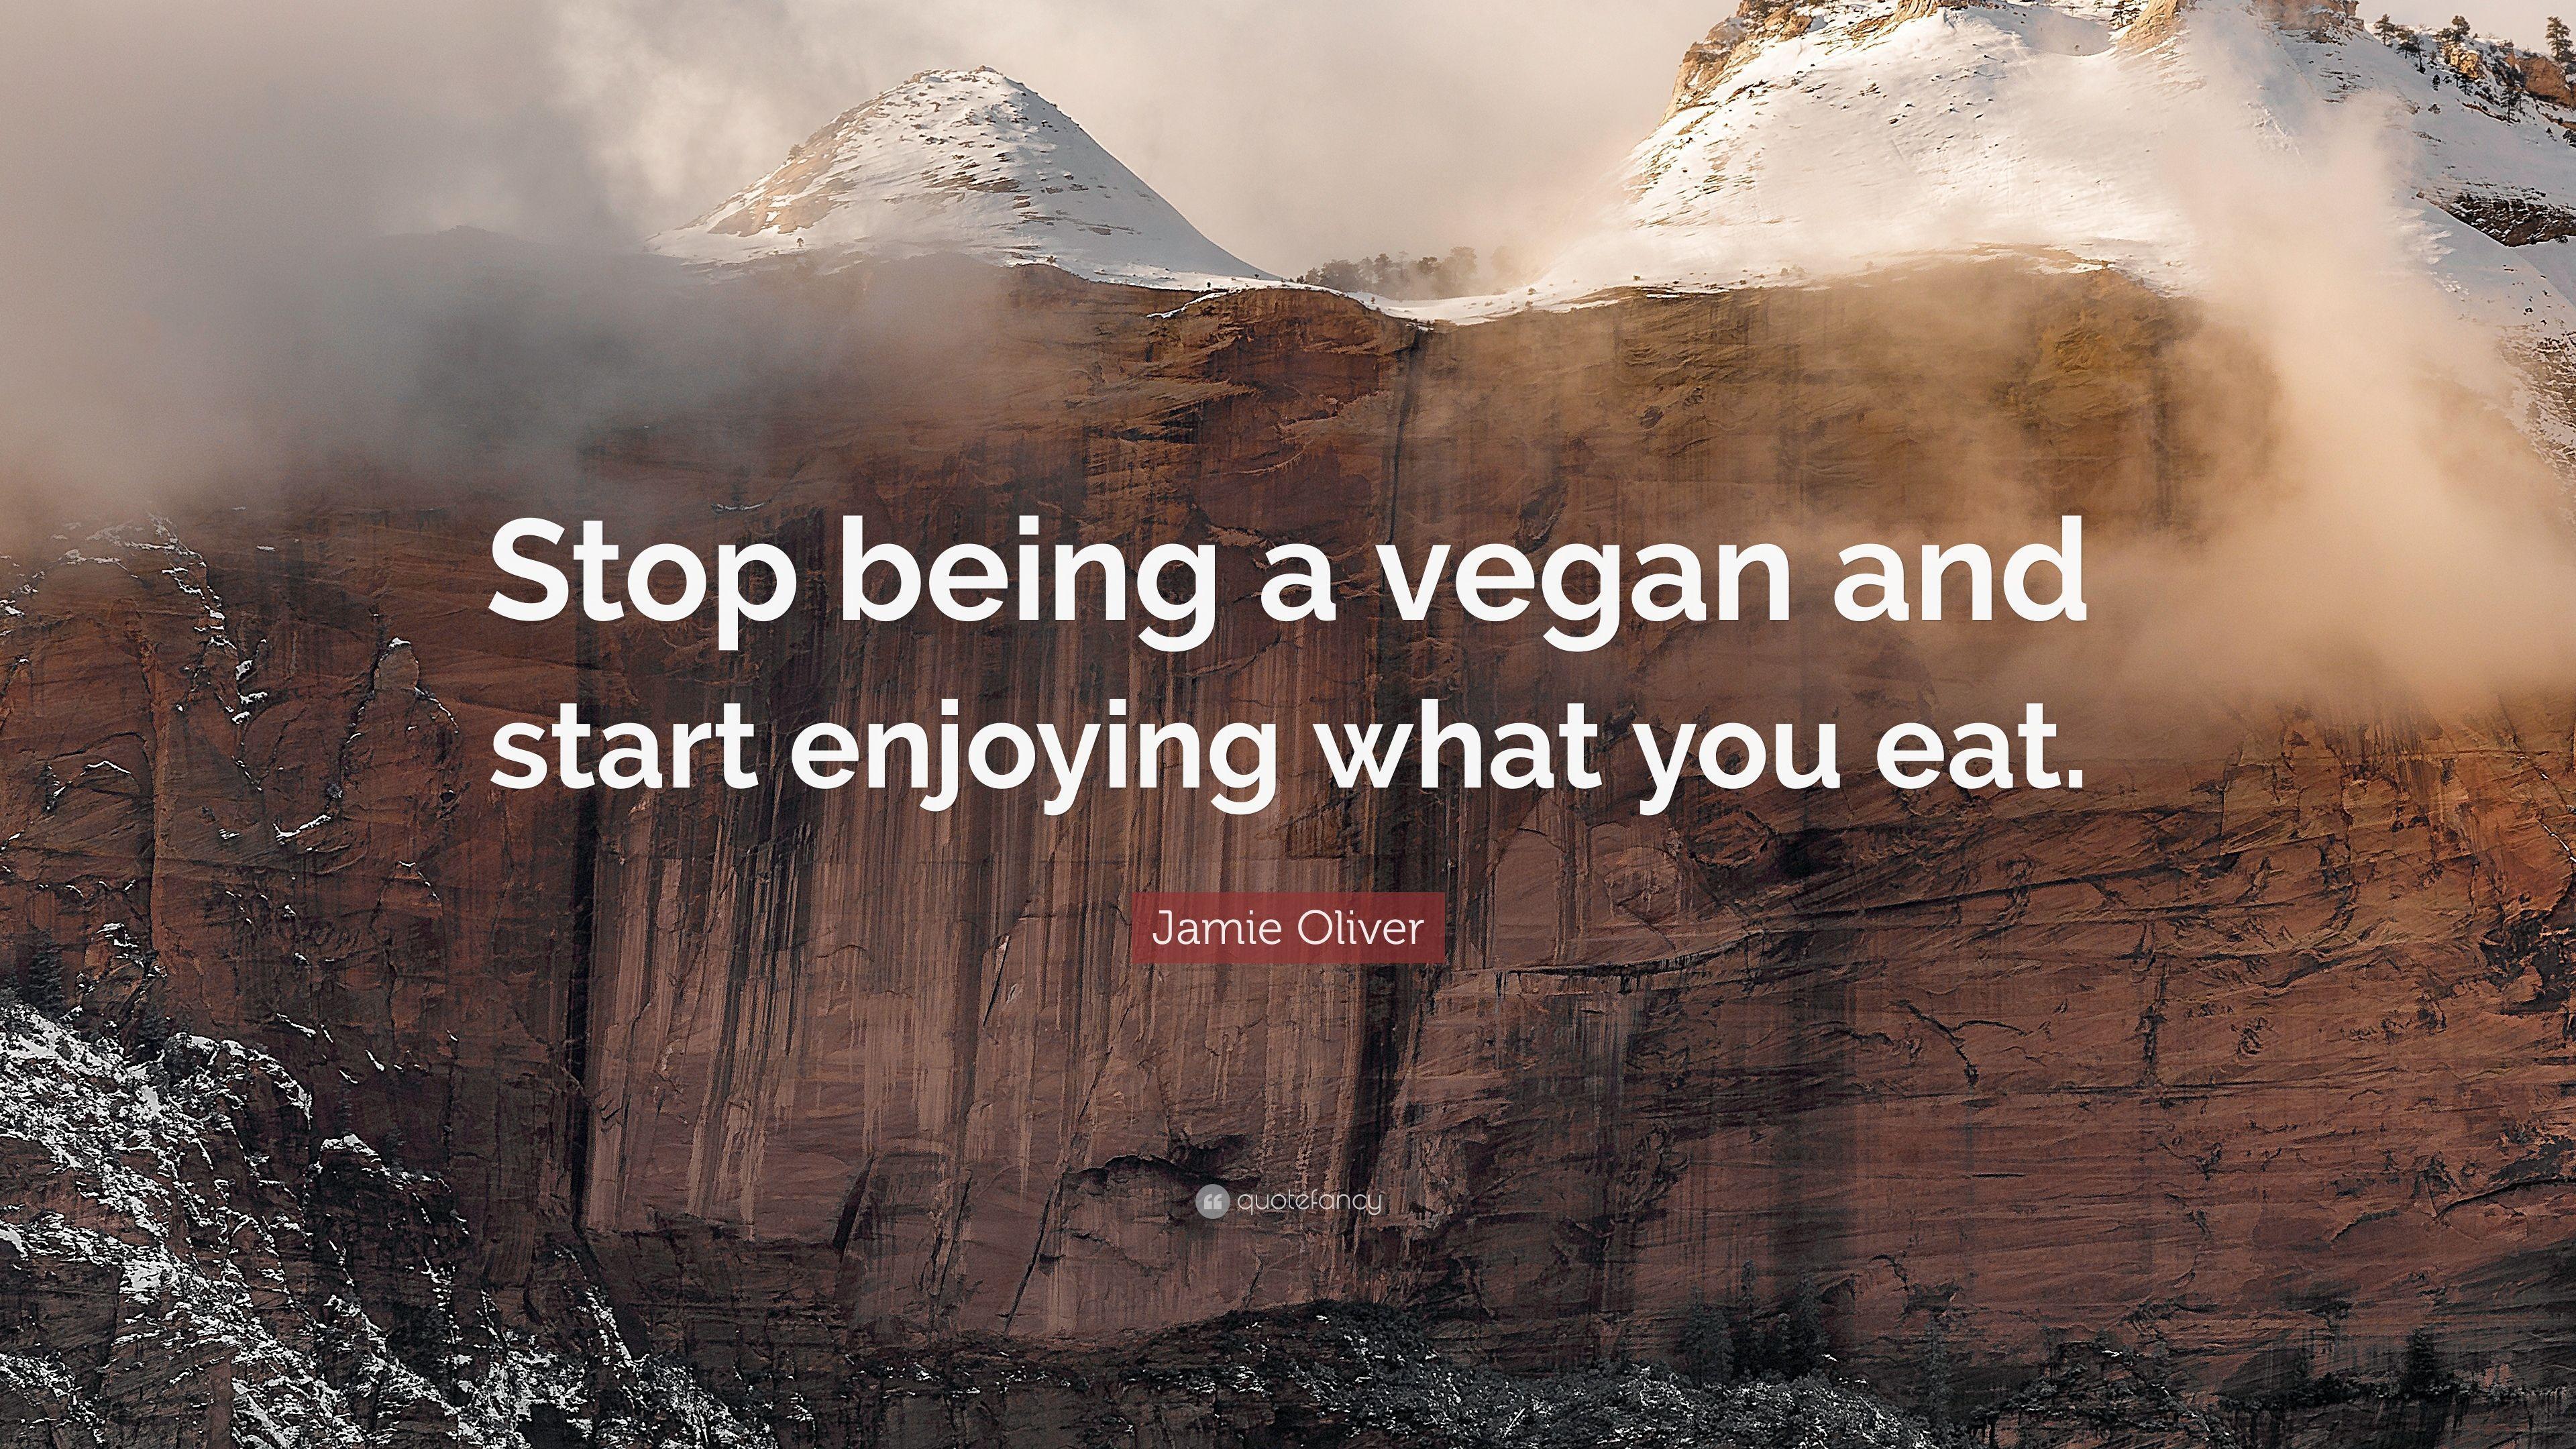 Jamie Oliver Quote: “Stop being a vegan and start enjoying what